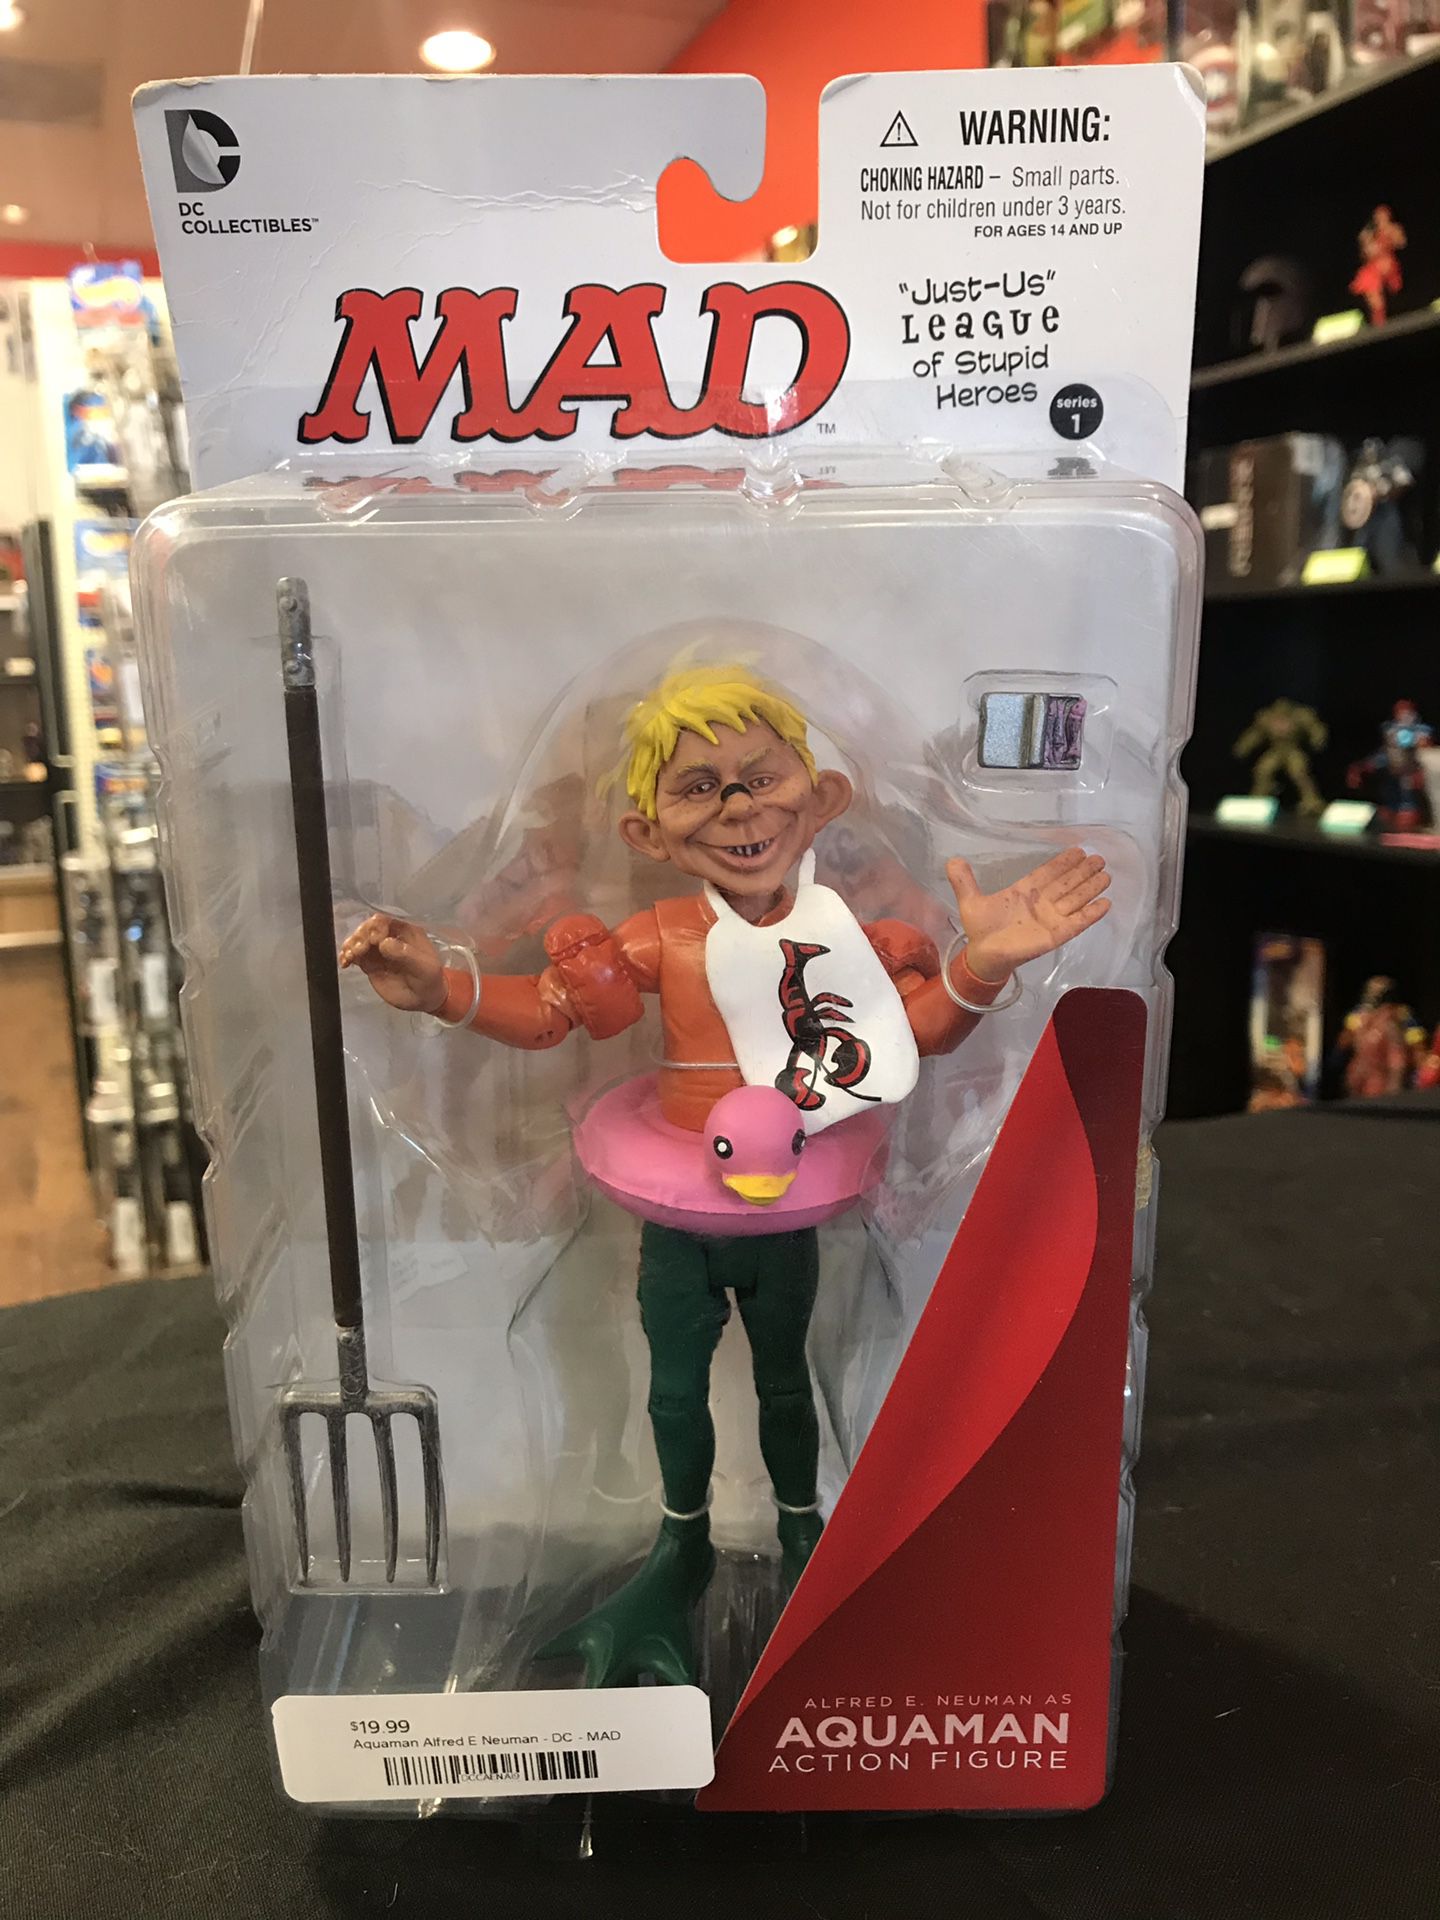 Mad - Alfred E Neuman as Aquaman action figure